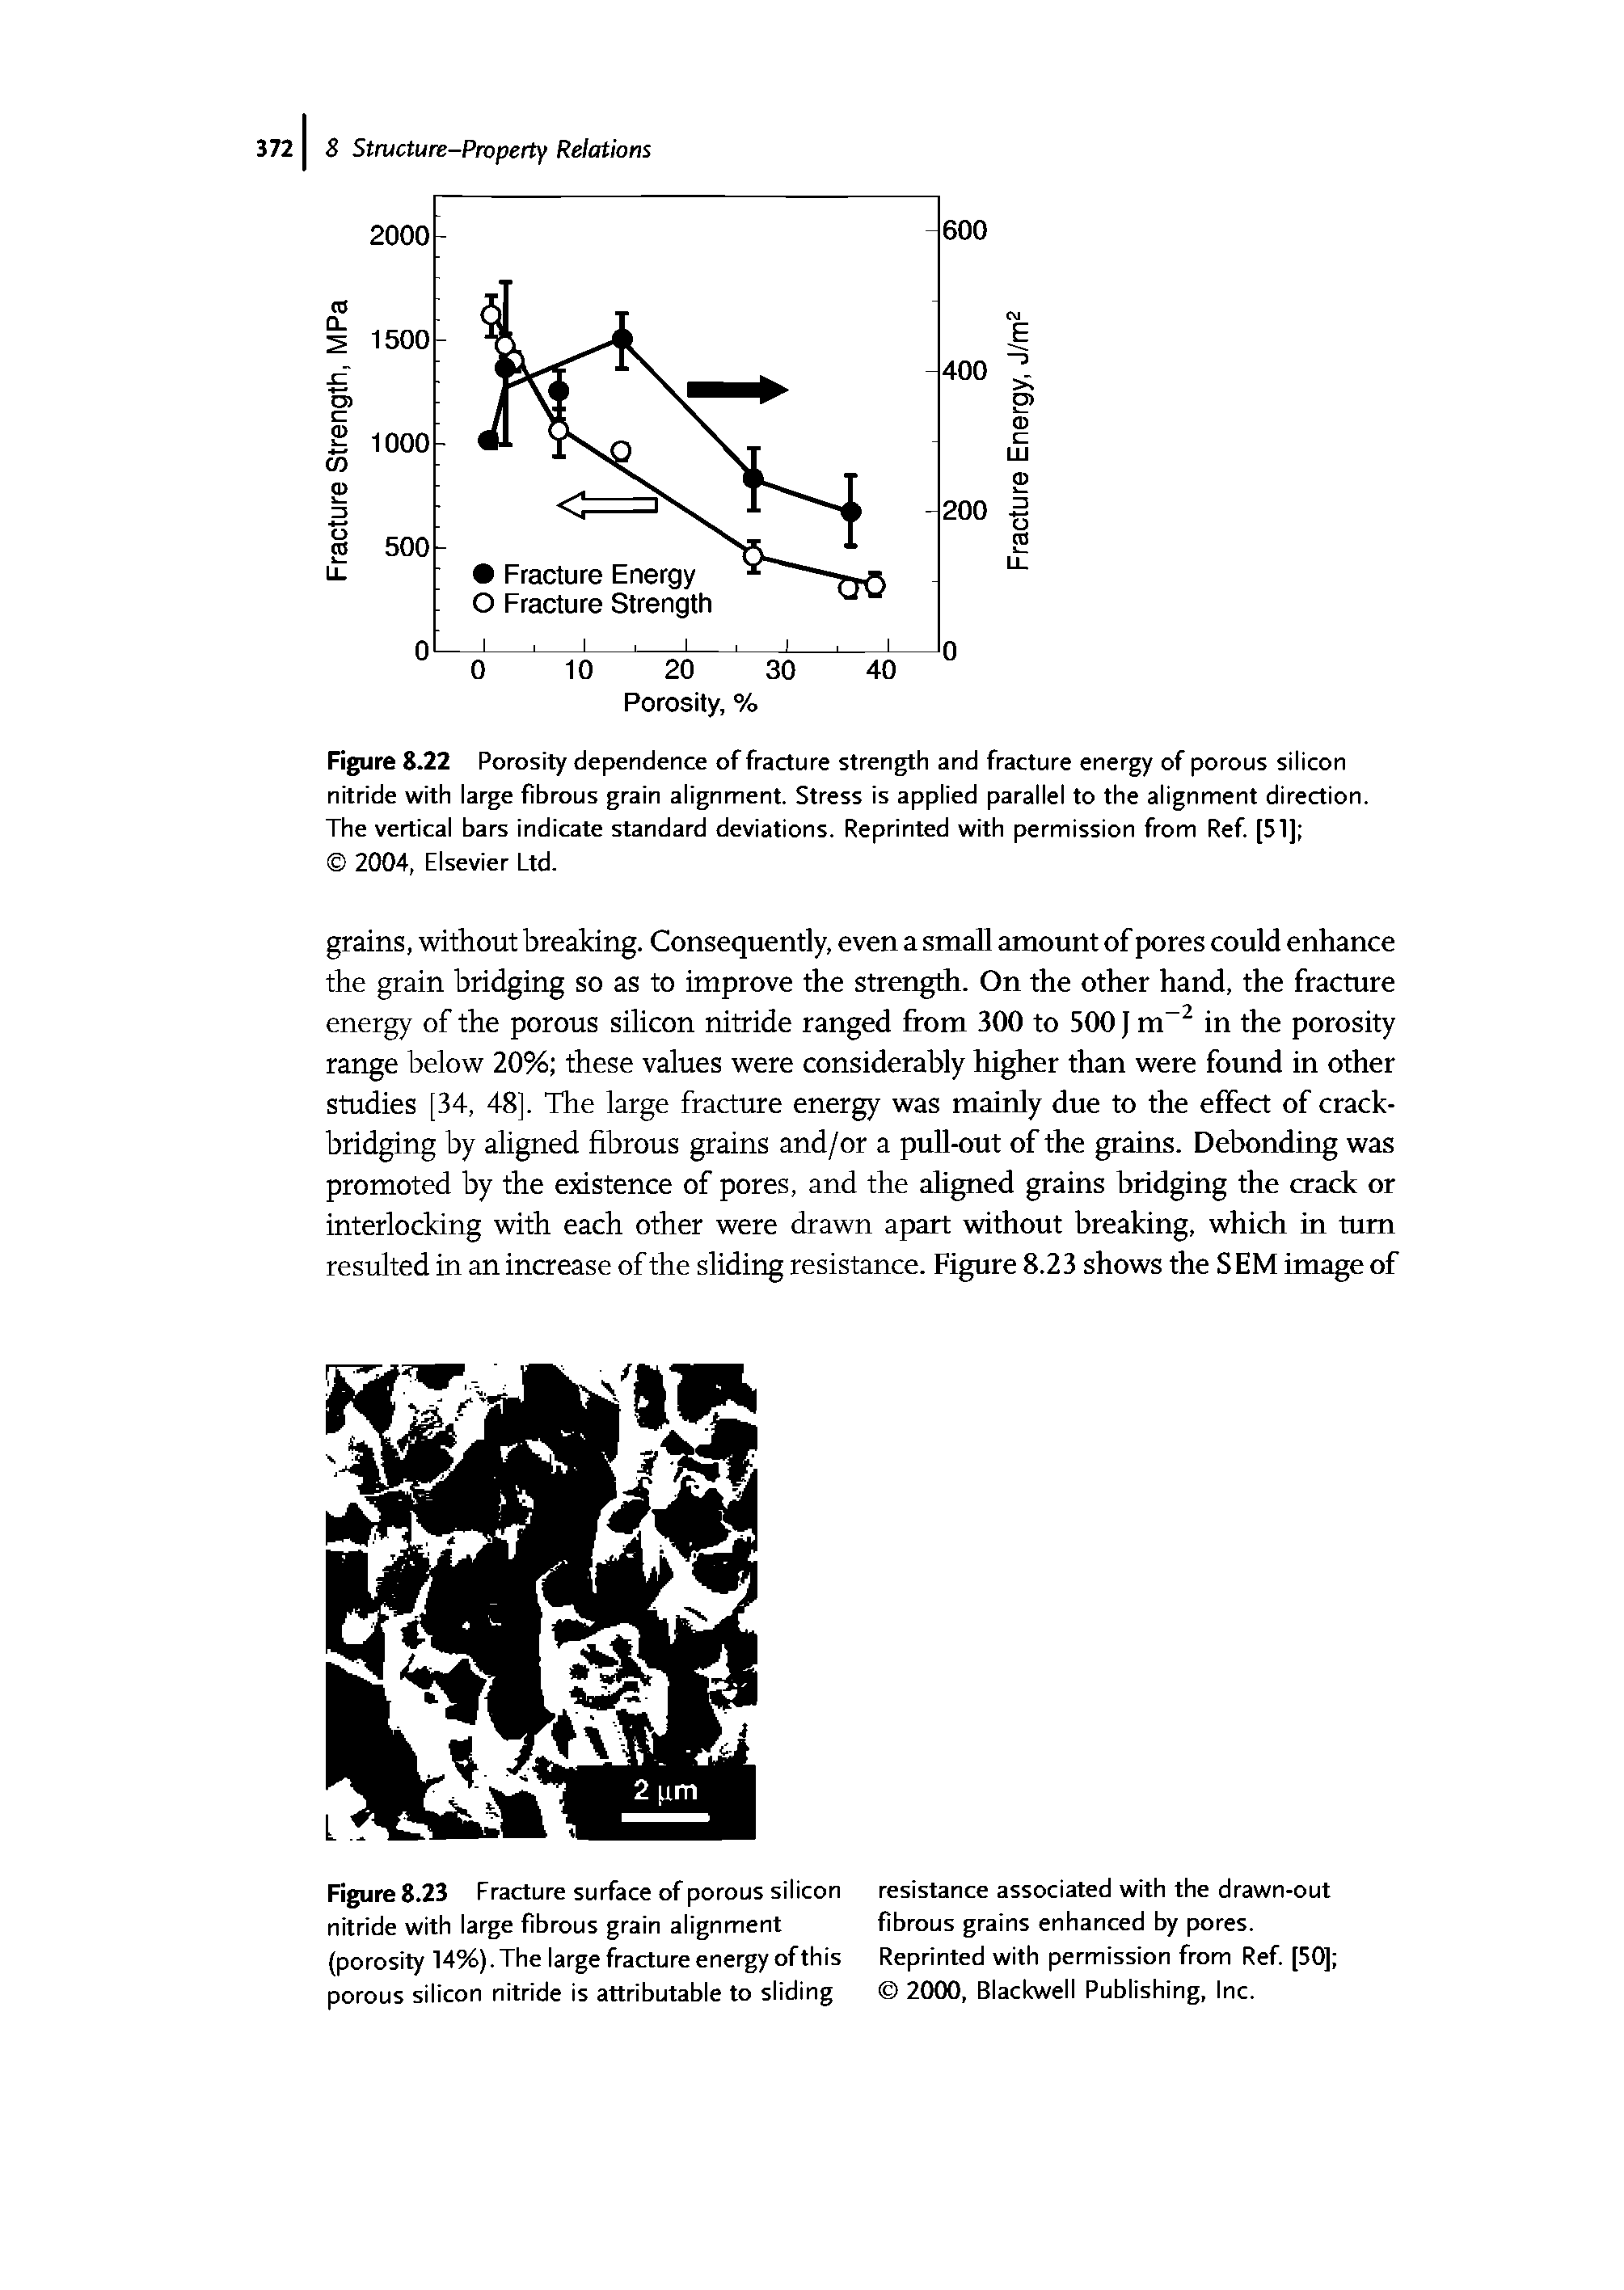 Figure 8.22 Porosity dependence of fracture strength and fracture energy of porous silicon nitride with large fibrous grain alignment. Stress is applied parallel to the alignment direction. The vertical bars indicate standard deviations. Reprinted with permission from Ref [51] ...